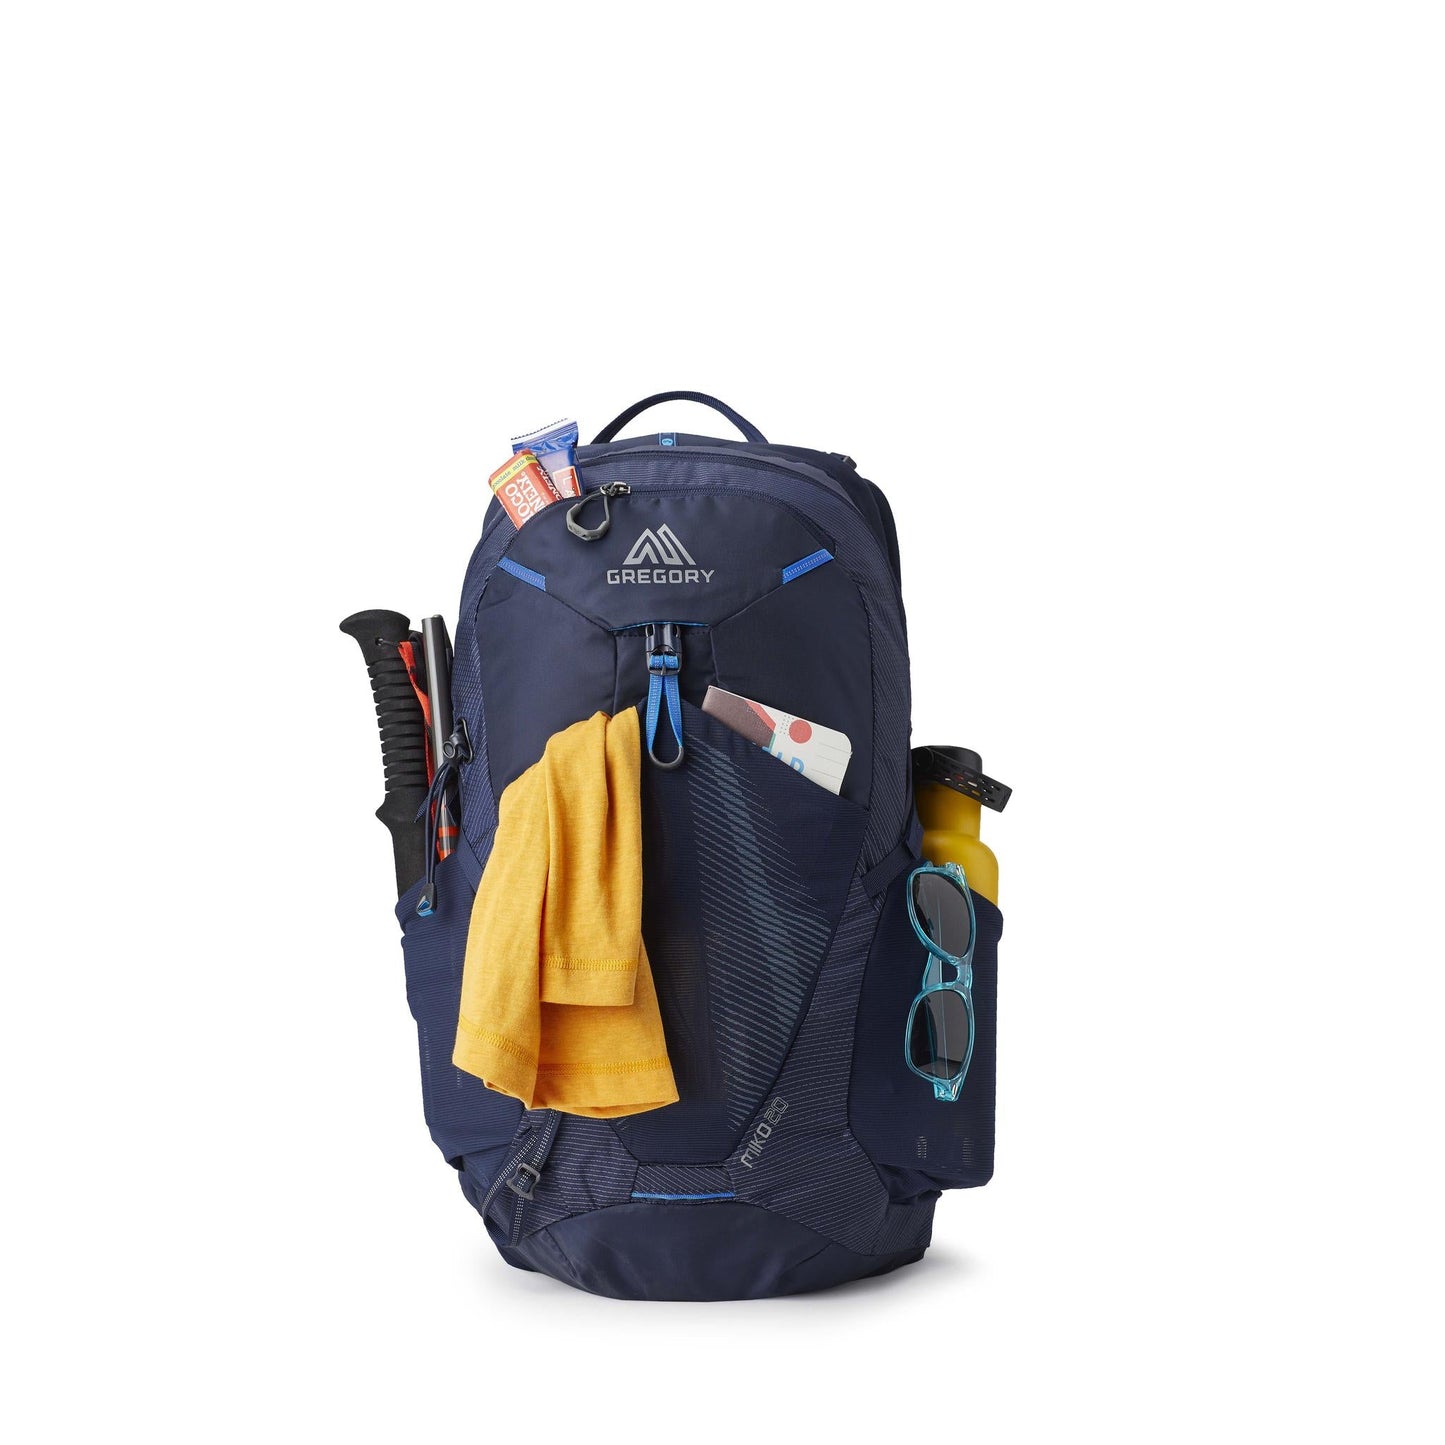 Gregory Miko 20 Backpack